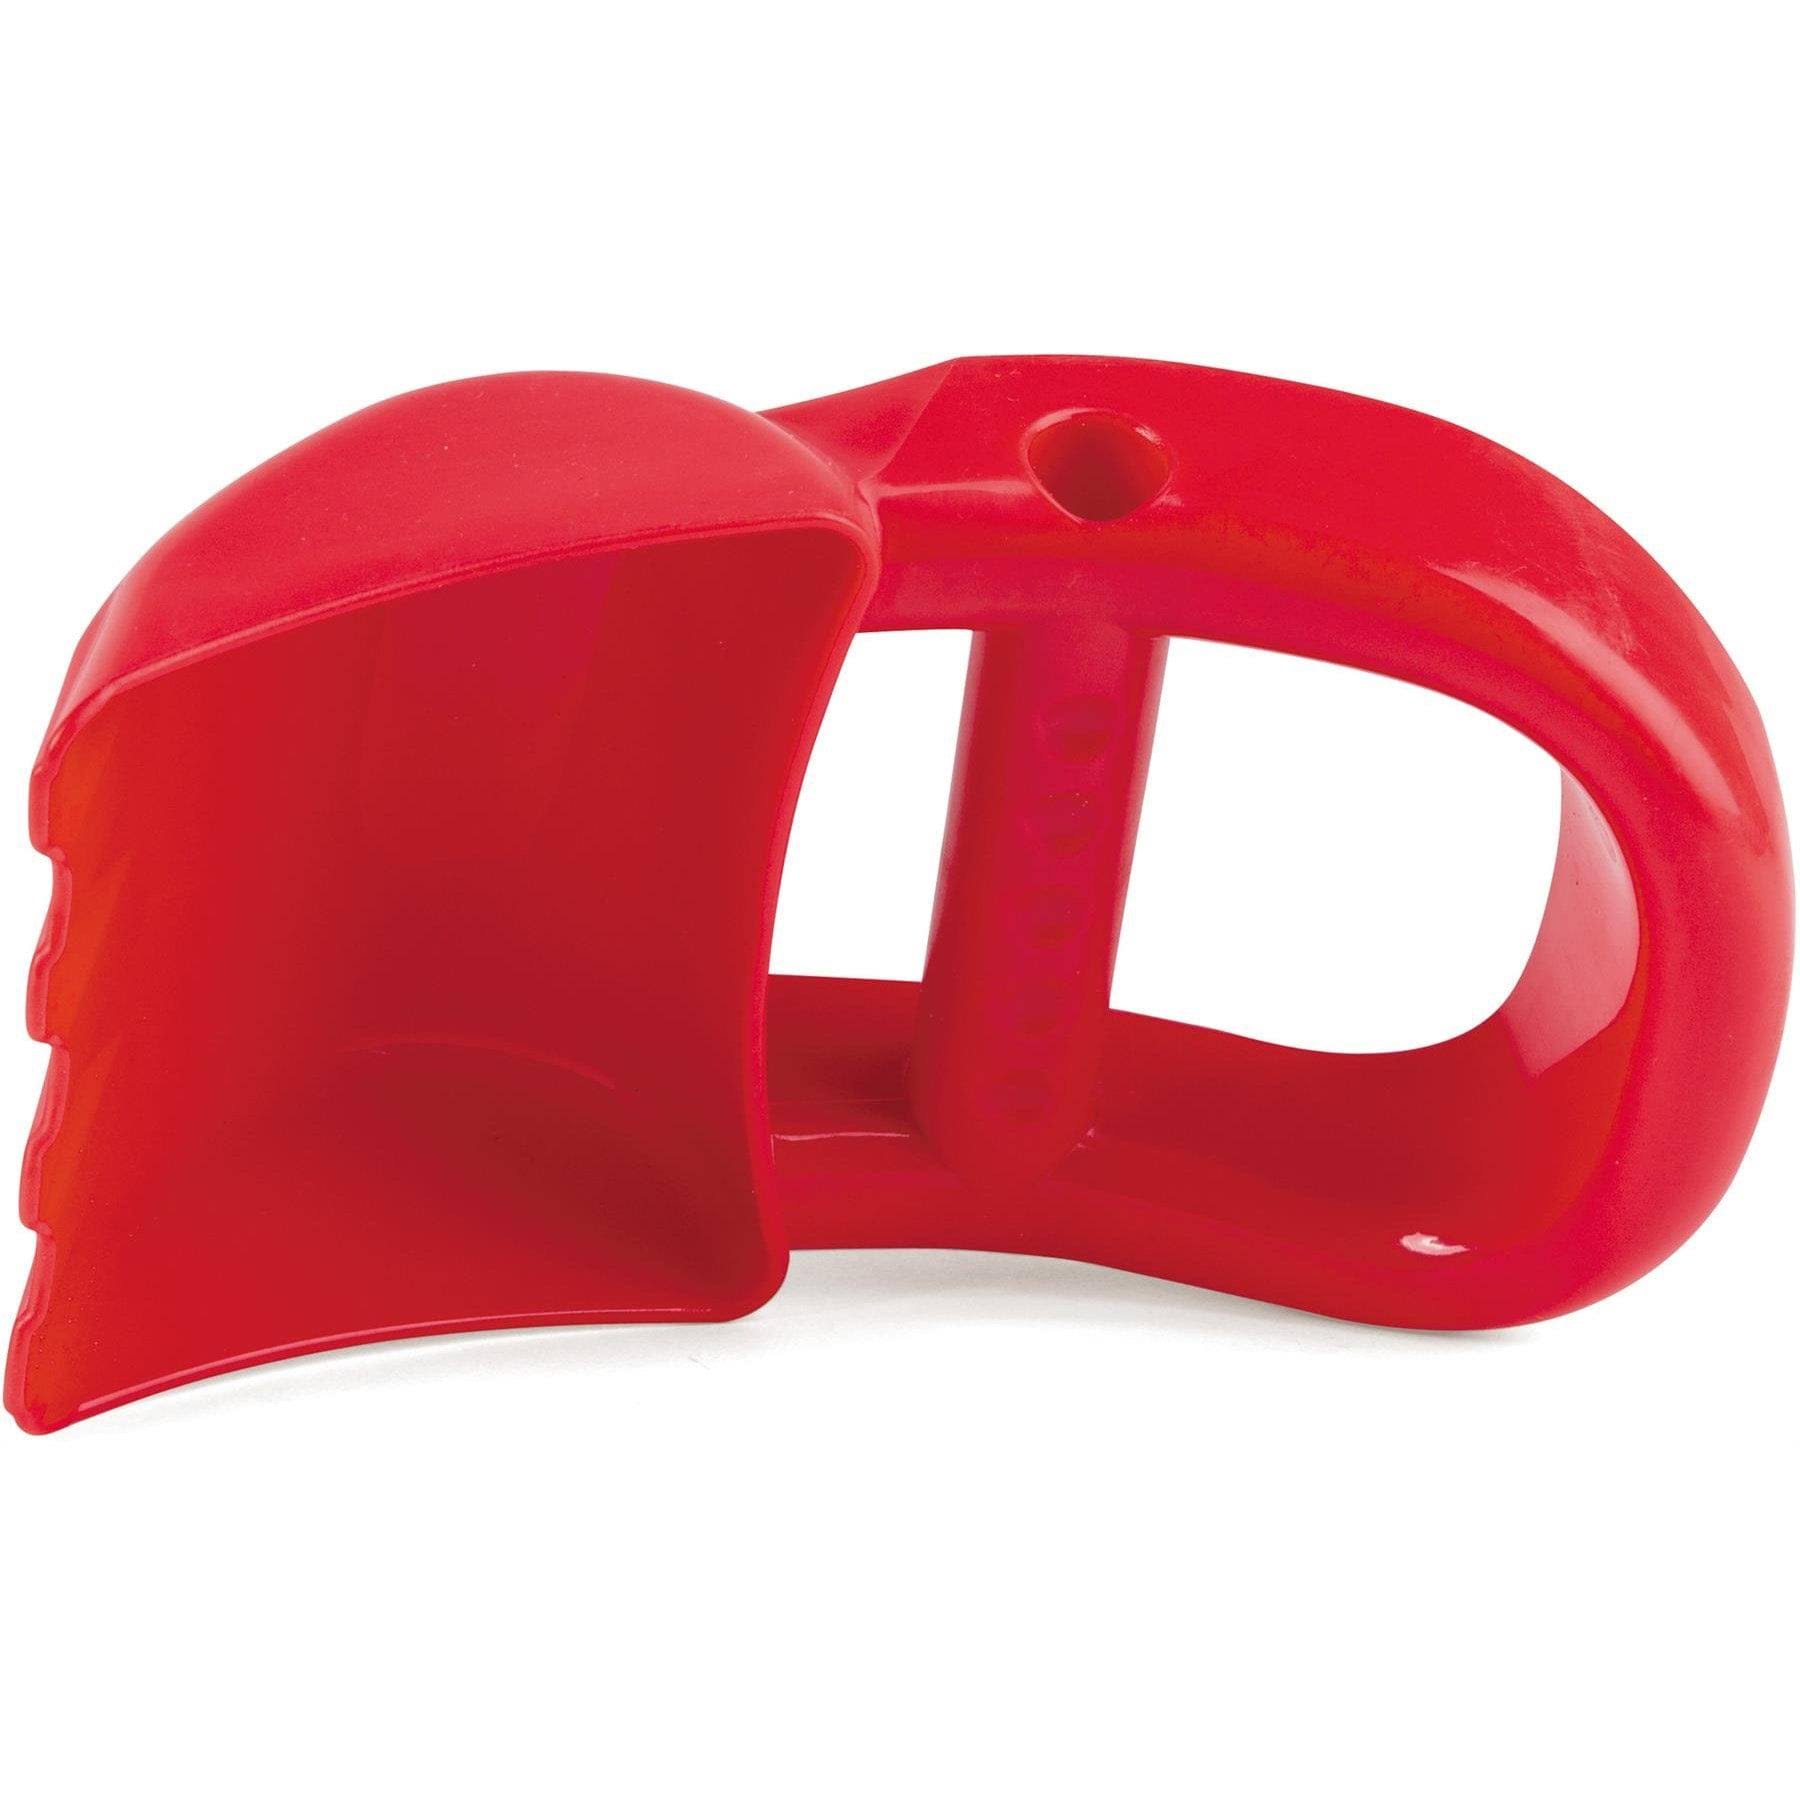 Hape Beach Hand Digger Sand Toy - Red